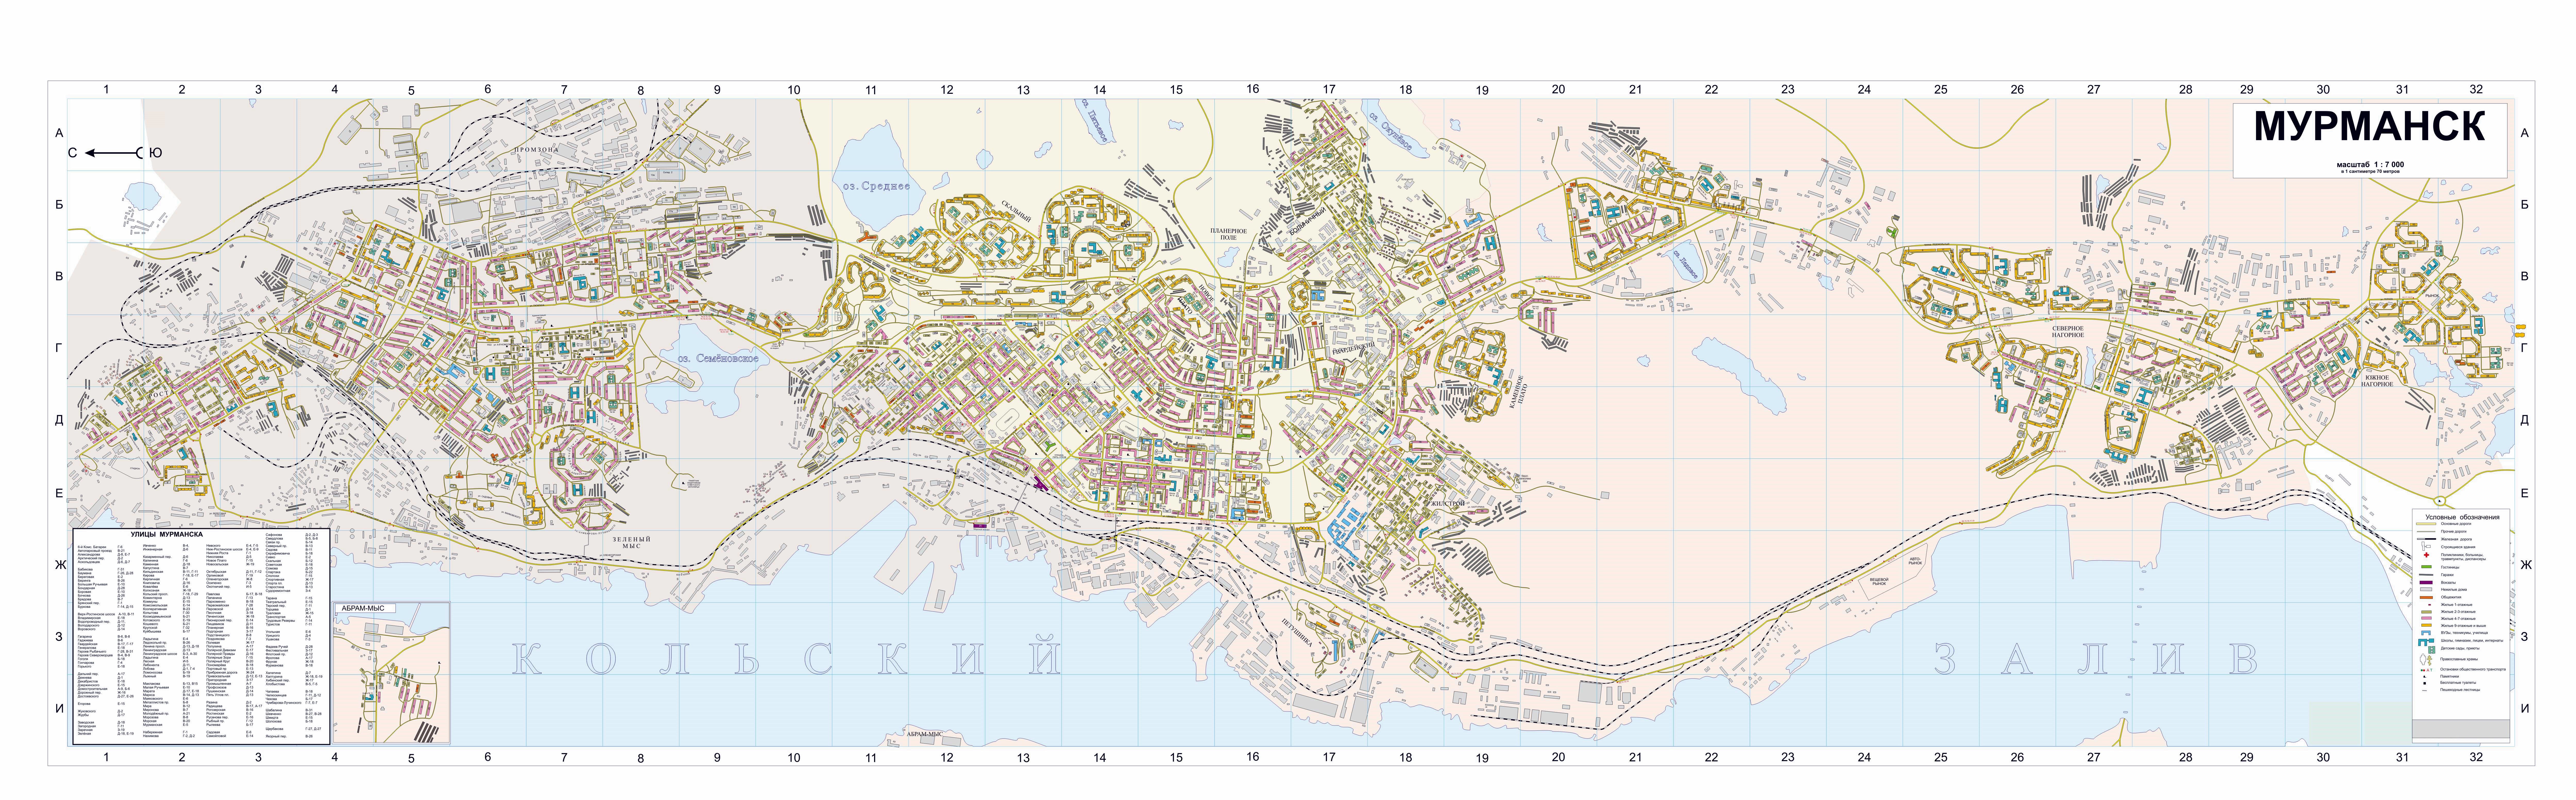 Large Murmansk Maps for Free Download and Print | High-Resolution and